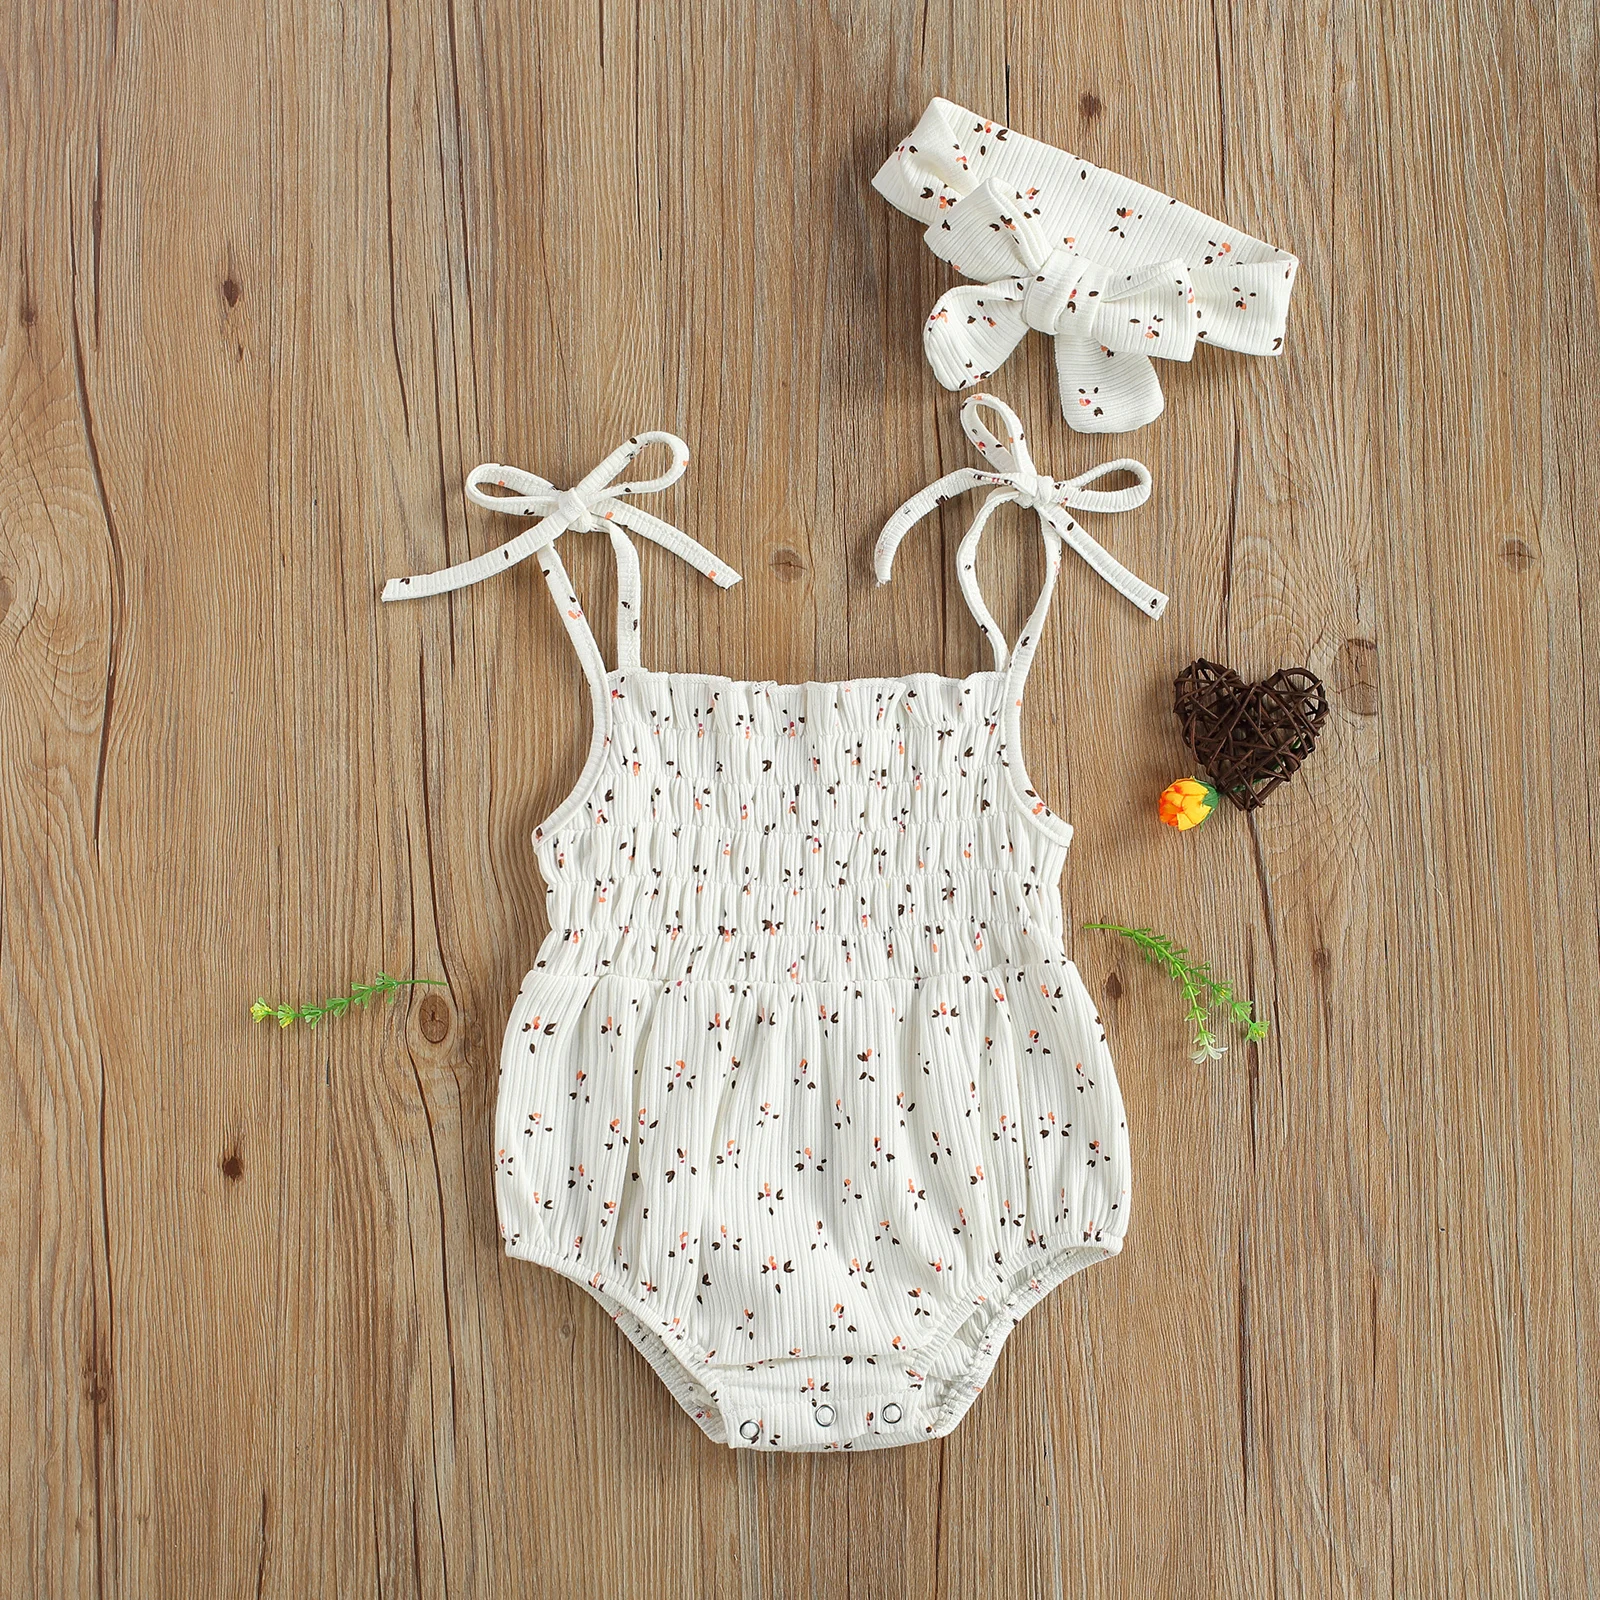 Sommer Neue Prinzessin Infant Baby Mädchen Romper Outfits Ärmelloses Floral Print Lace Up Overall + Bowknot Stirnband Baumwolle Beachwear